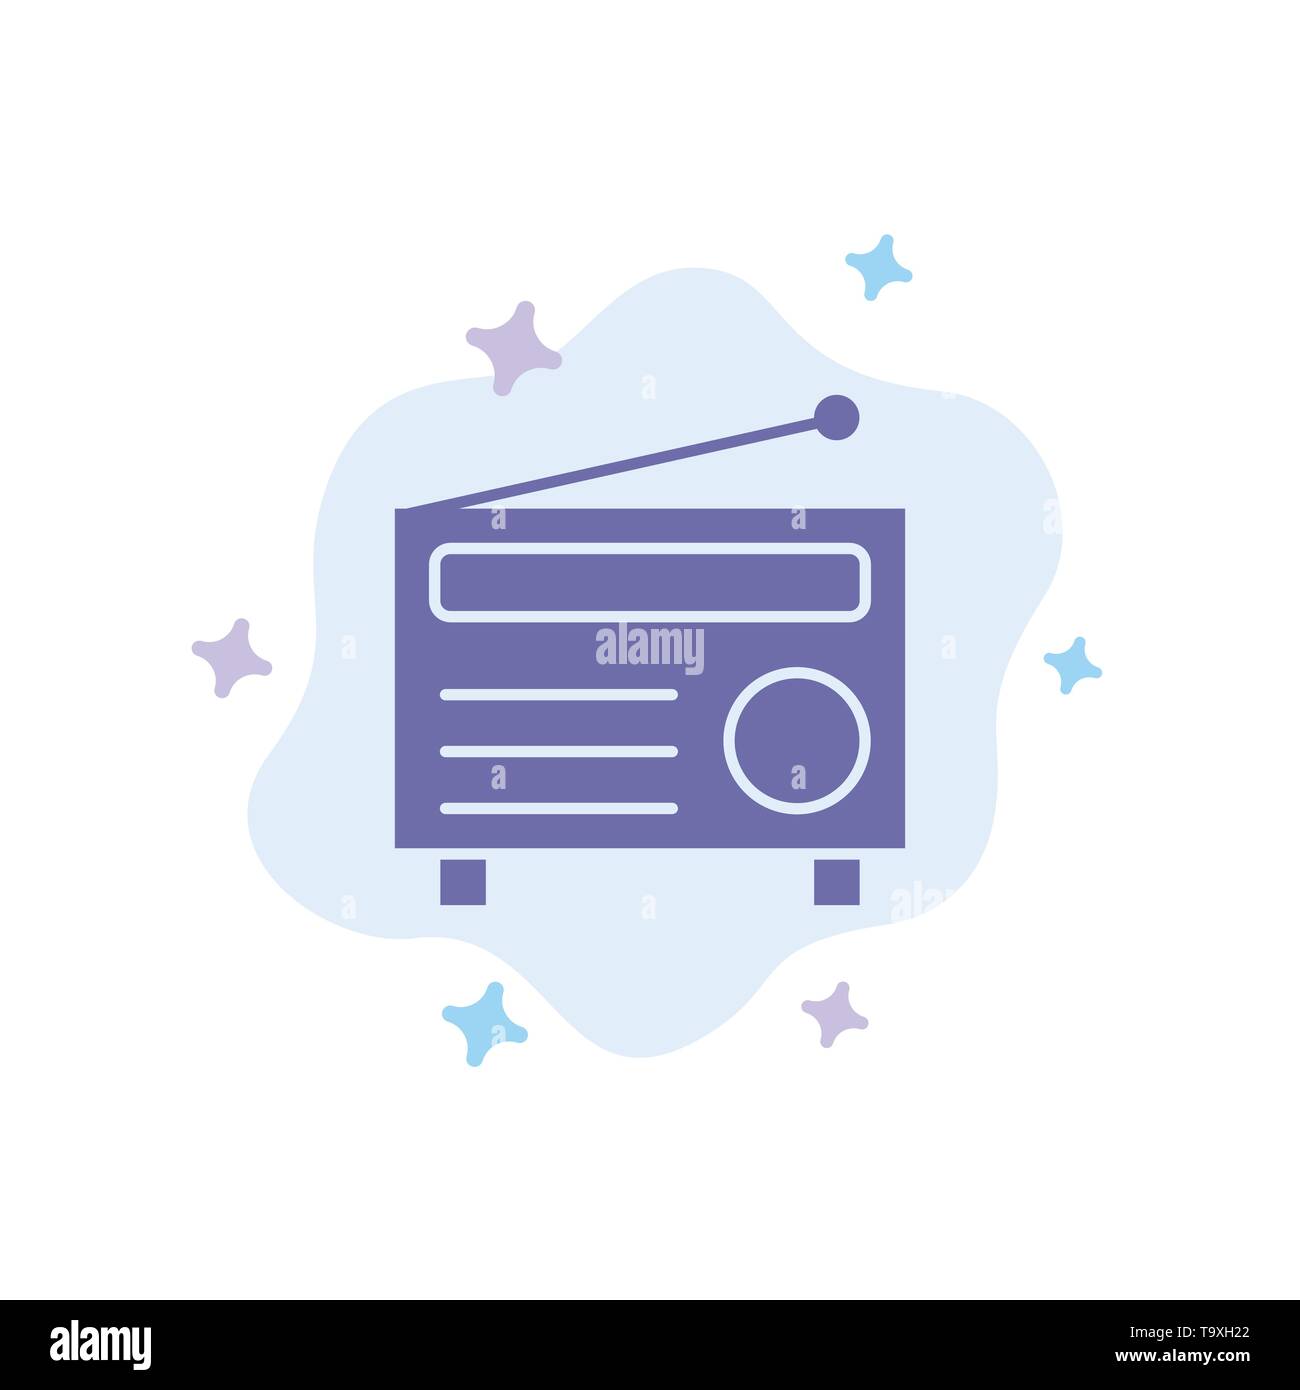 Radio, FM, Audio, Media Blue Icon on Abstract Cloud Background Stock Vector